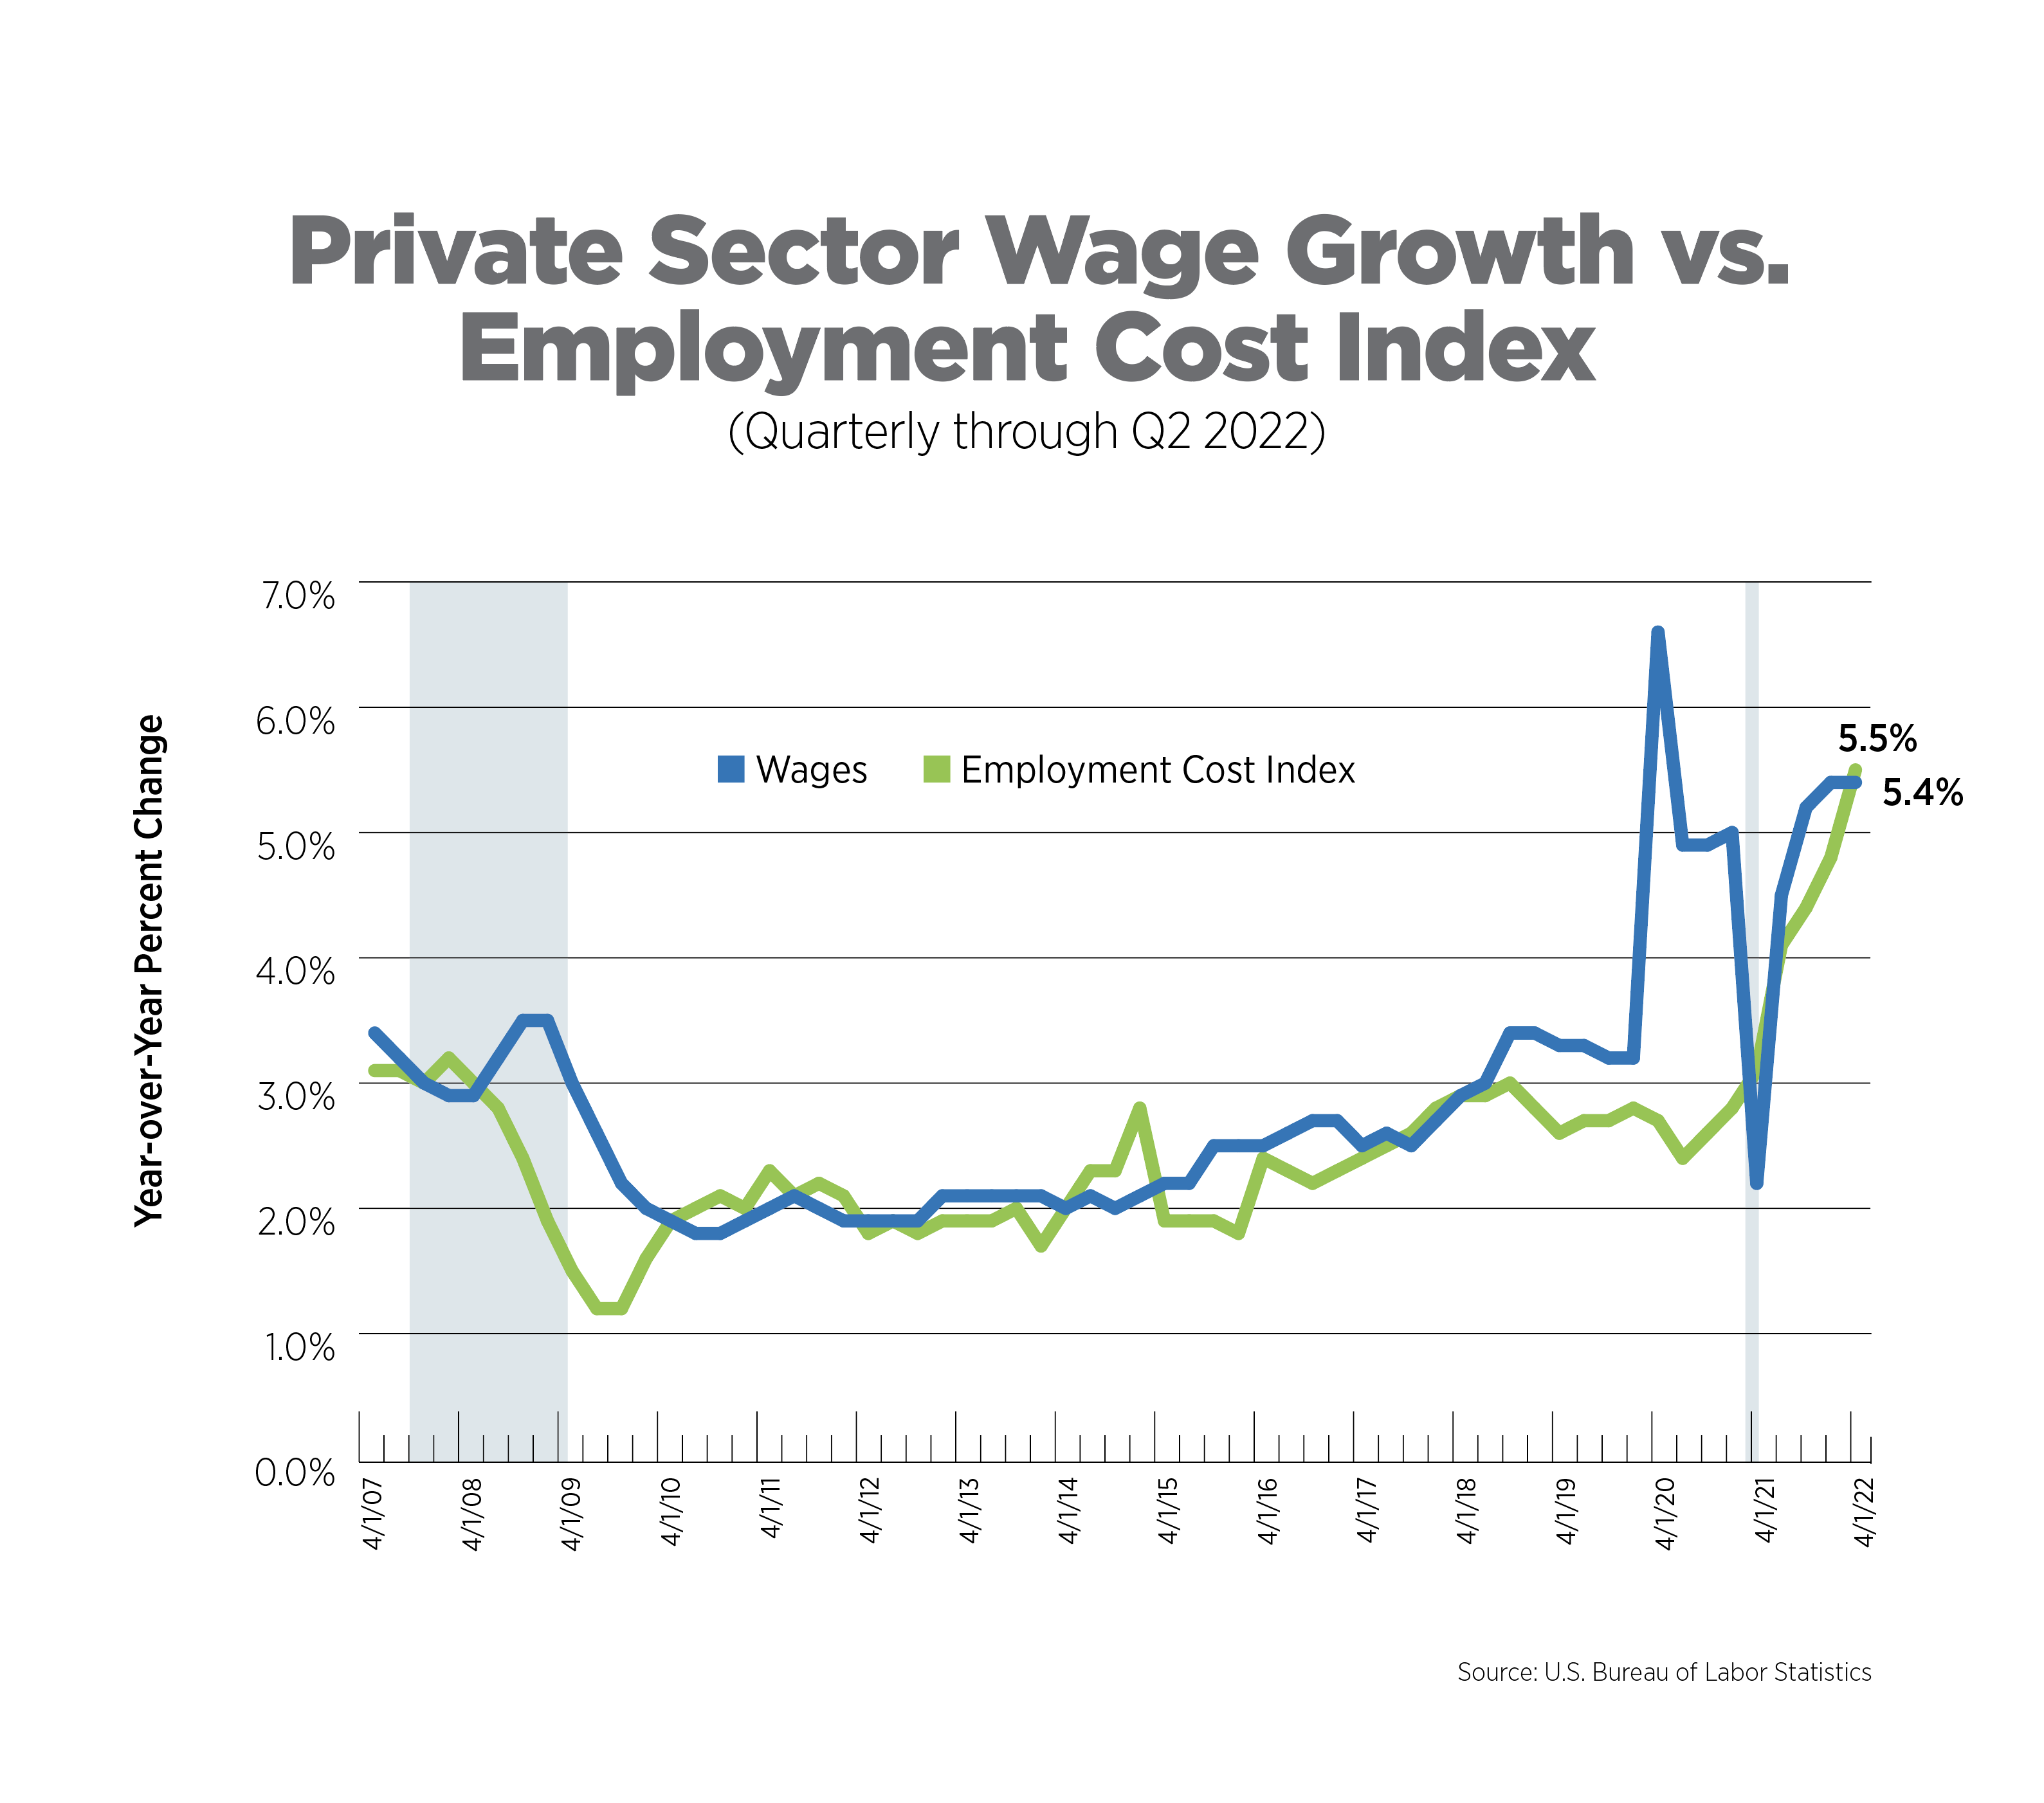 private sector wage growth vs employment cost index, quarterly through q2 2022